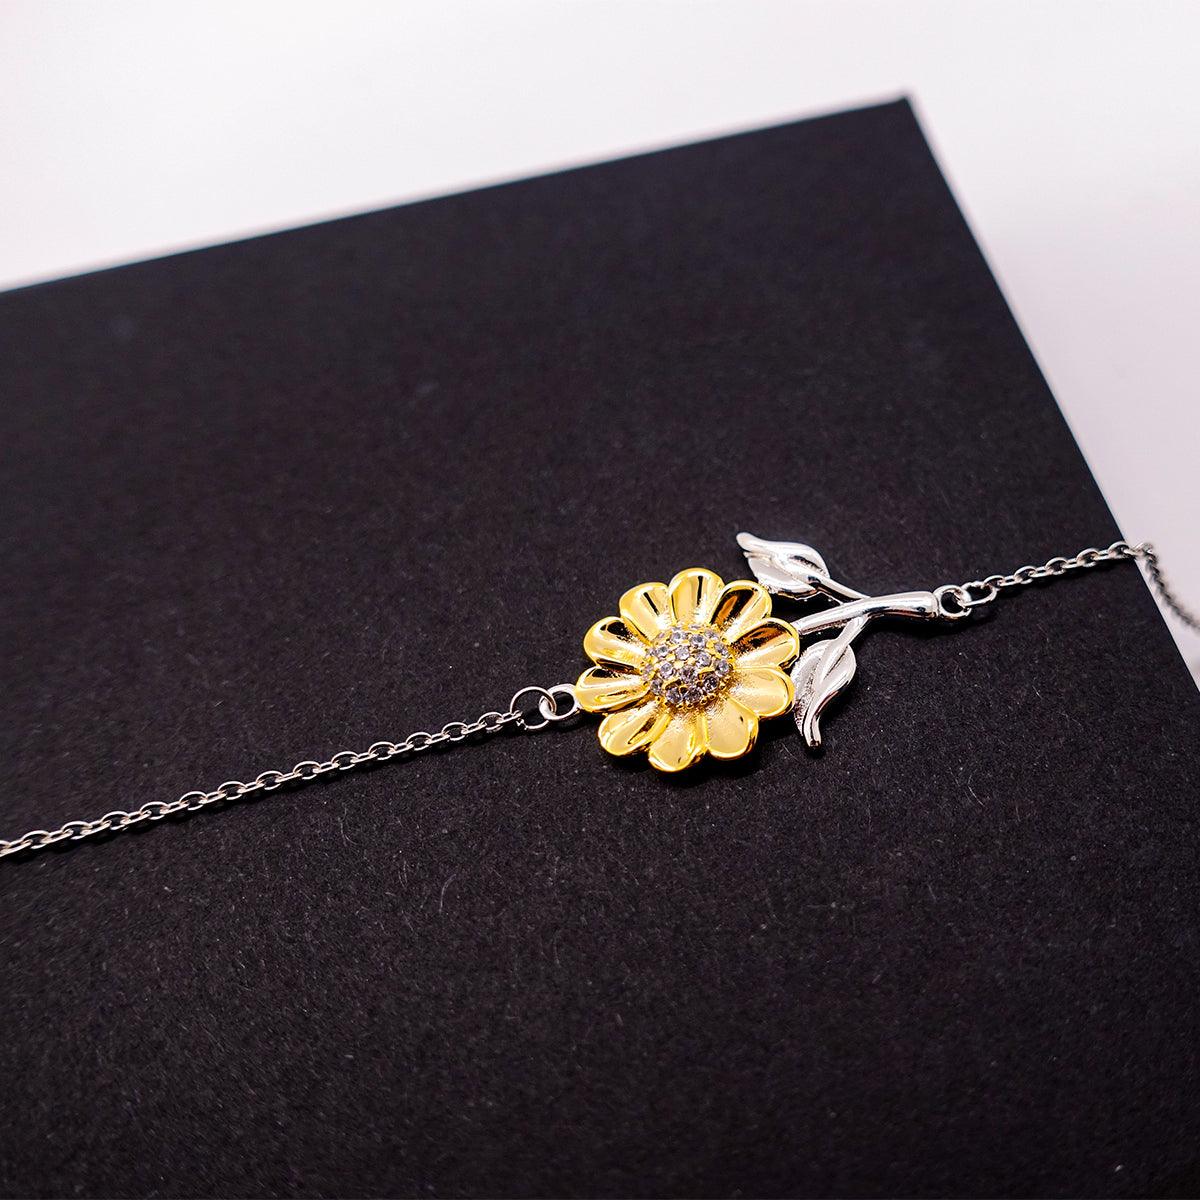 Dancer Sunflower Bracelet - Thanks for being who you are - Birthday Christmas Jewelry Gifts Coworkers Colleague Boss - Mallard Moon Gift Shop